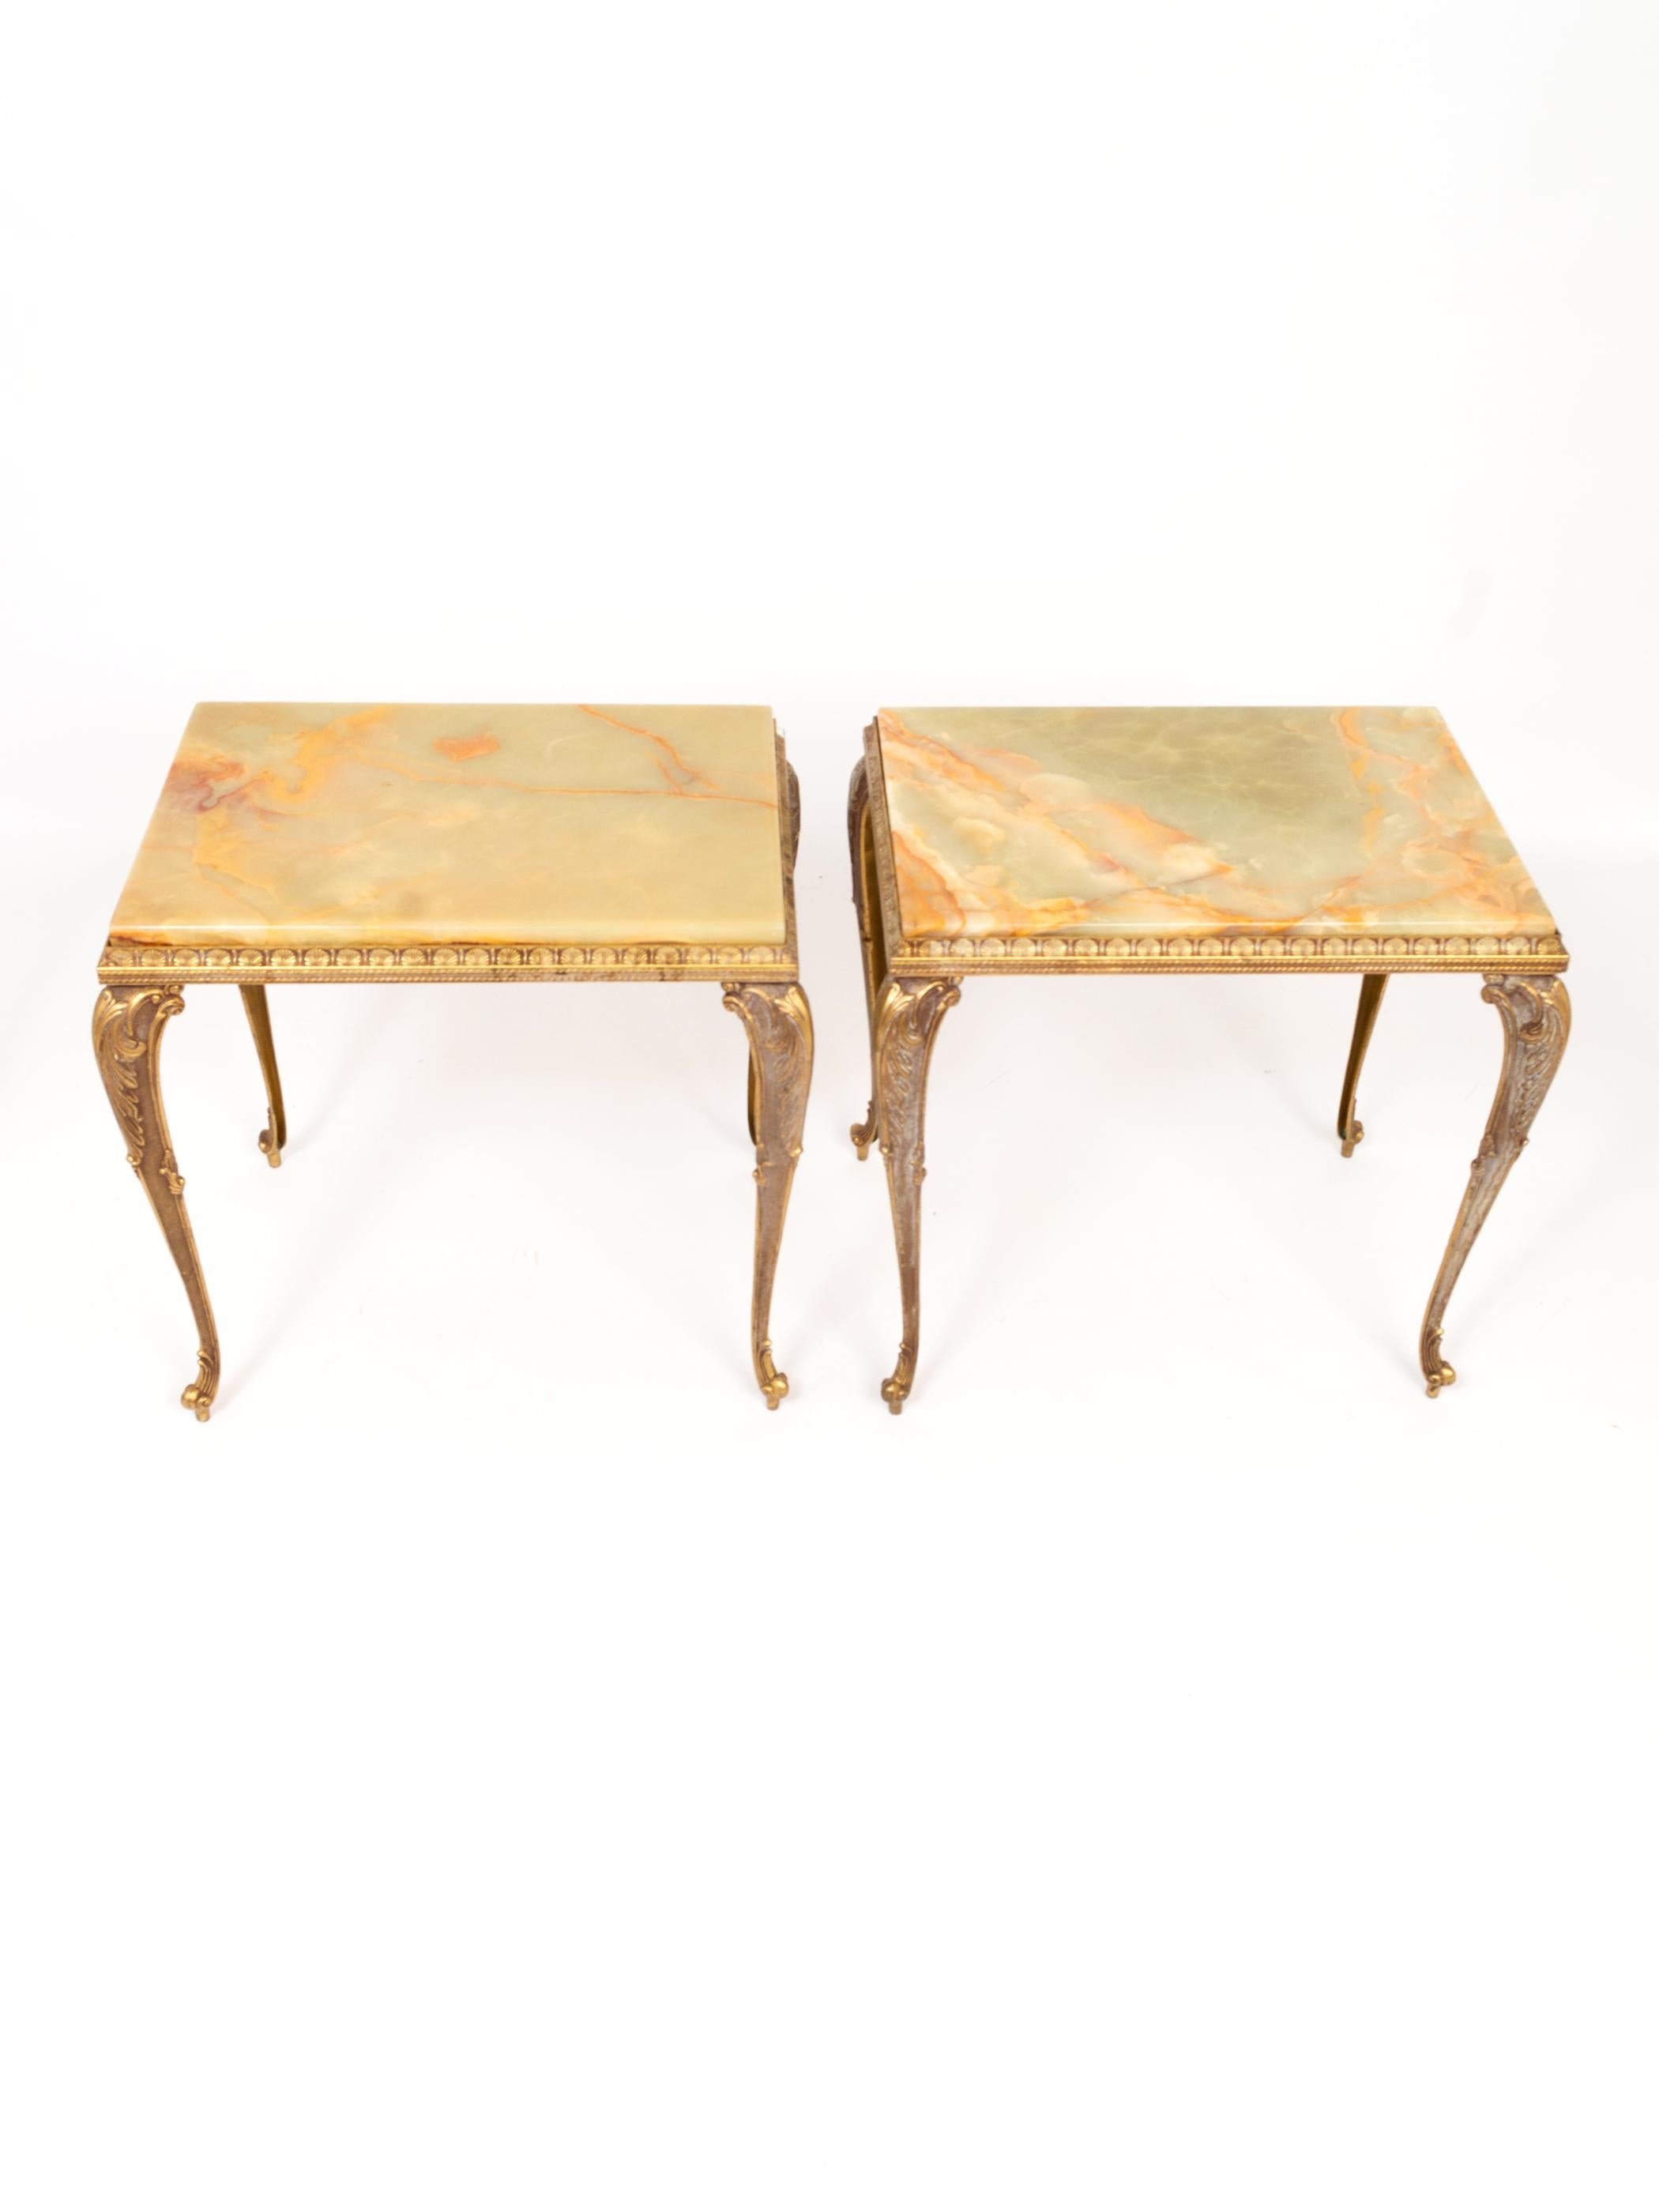 A Pair French gilt brass and onyx side lamp tables C.1940
Elegant classically French cabriole legs, and beautifully toned onyx.
In excellent vintage condition.
 